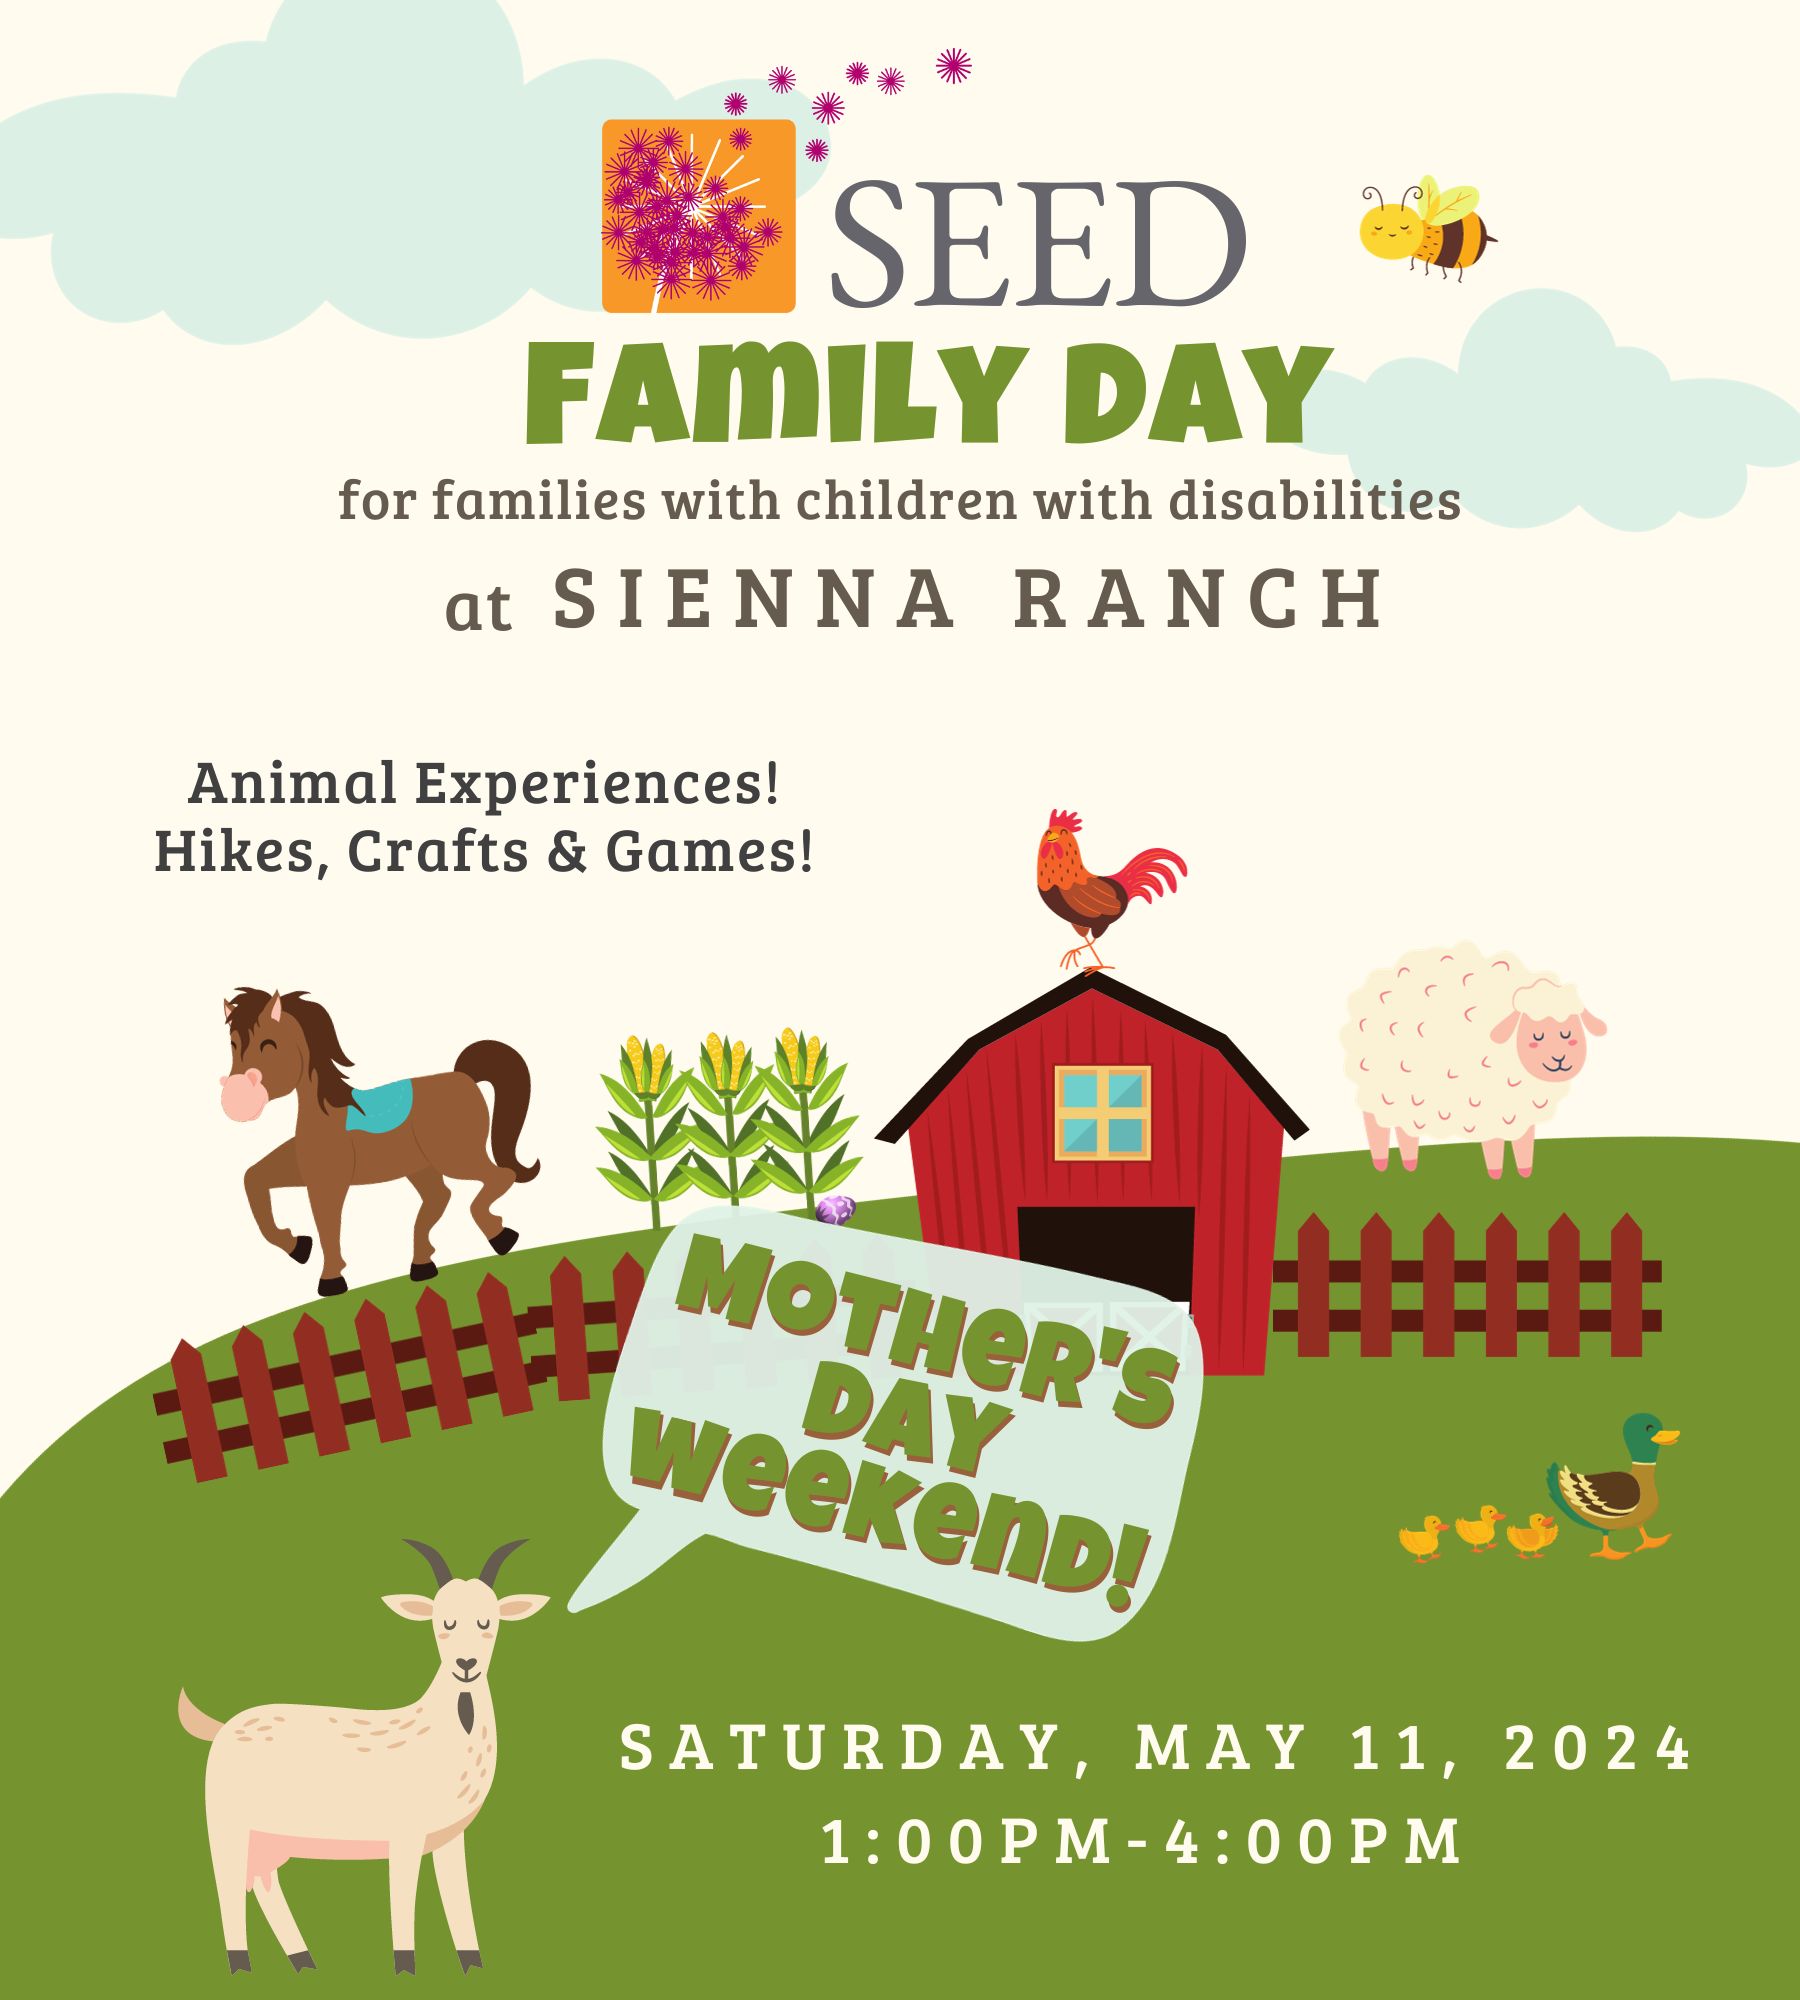 SEED Family Day at Sienna Ranch - Save the Date! May 11, 2024 1pm-4pm